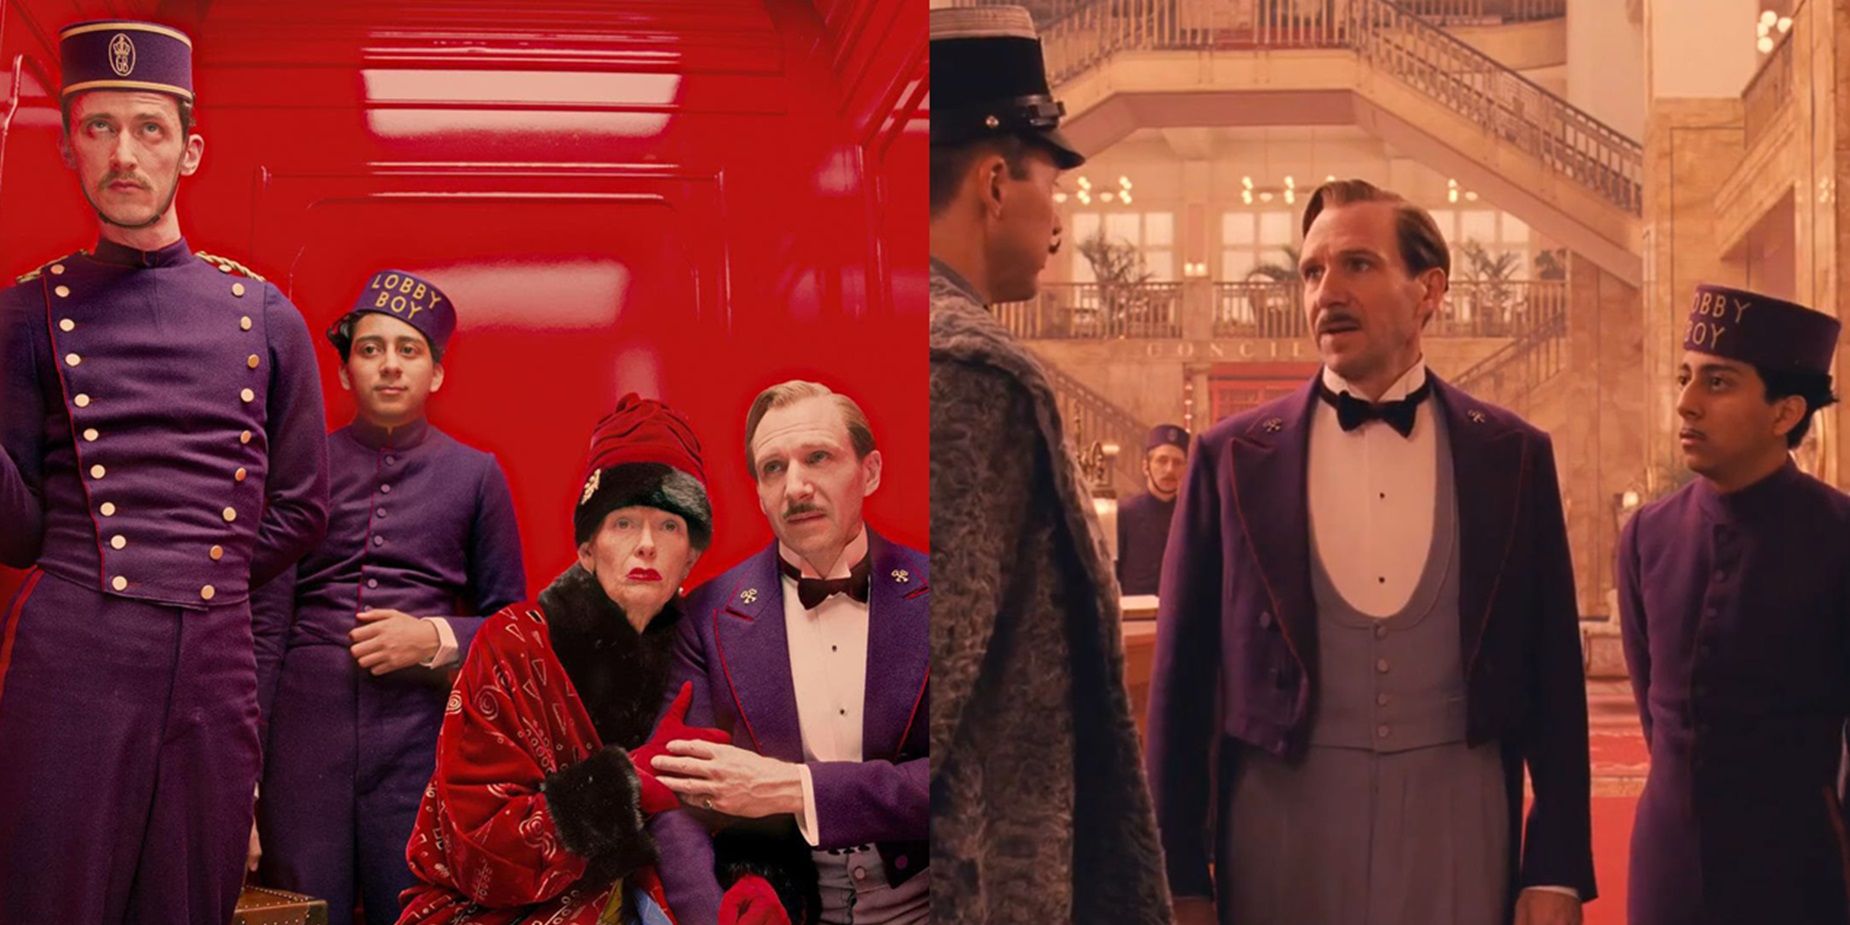 Screenshots from The Grand Budapest Hotel